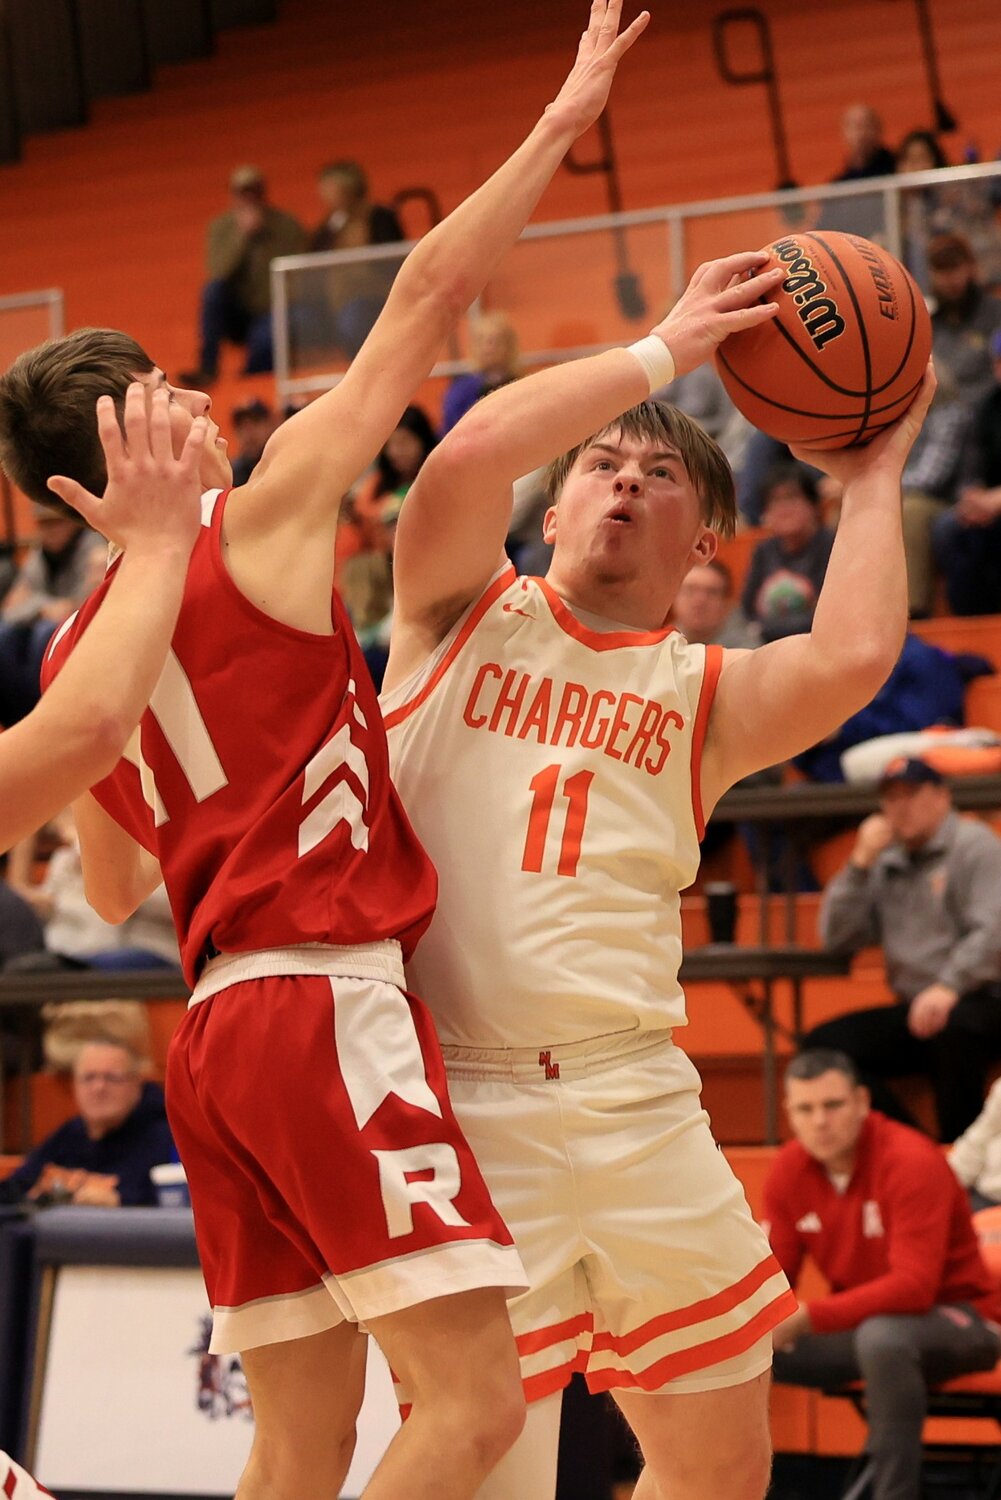 Ross Dyson attacks the basket as the senior got praise from Coach Chad Arnold for his play on the defensive side of the ball.